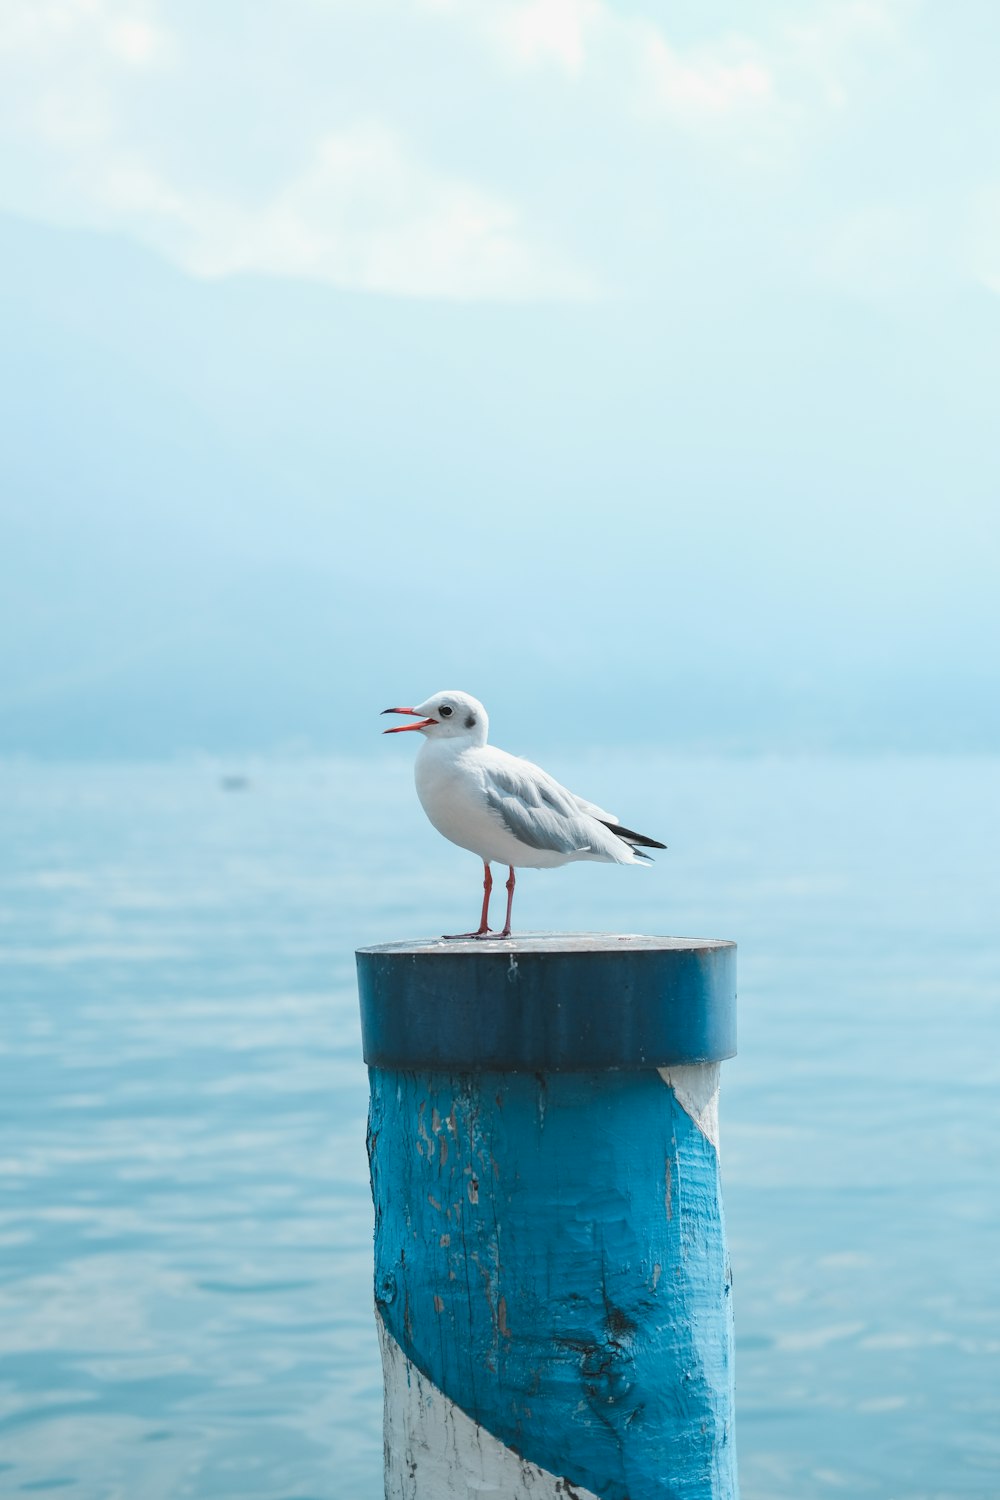 white and gray bird on blue wooden post near sea during daytime